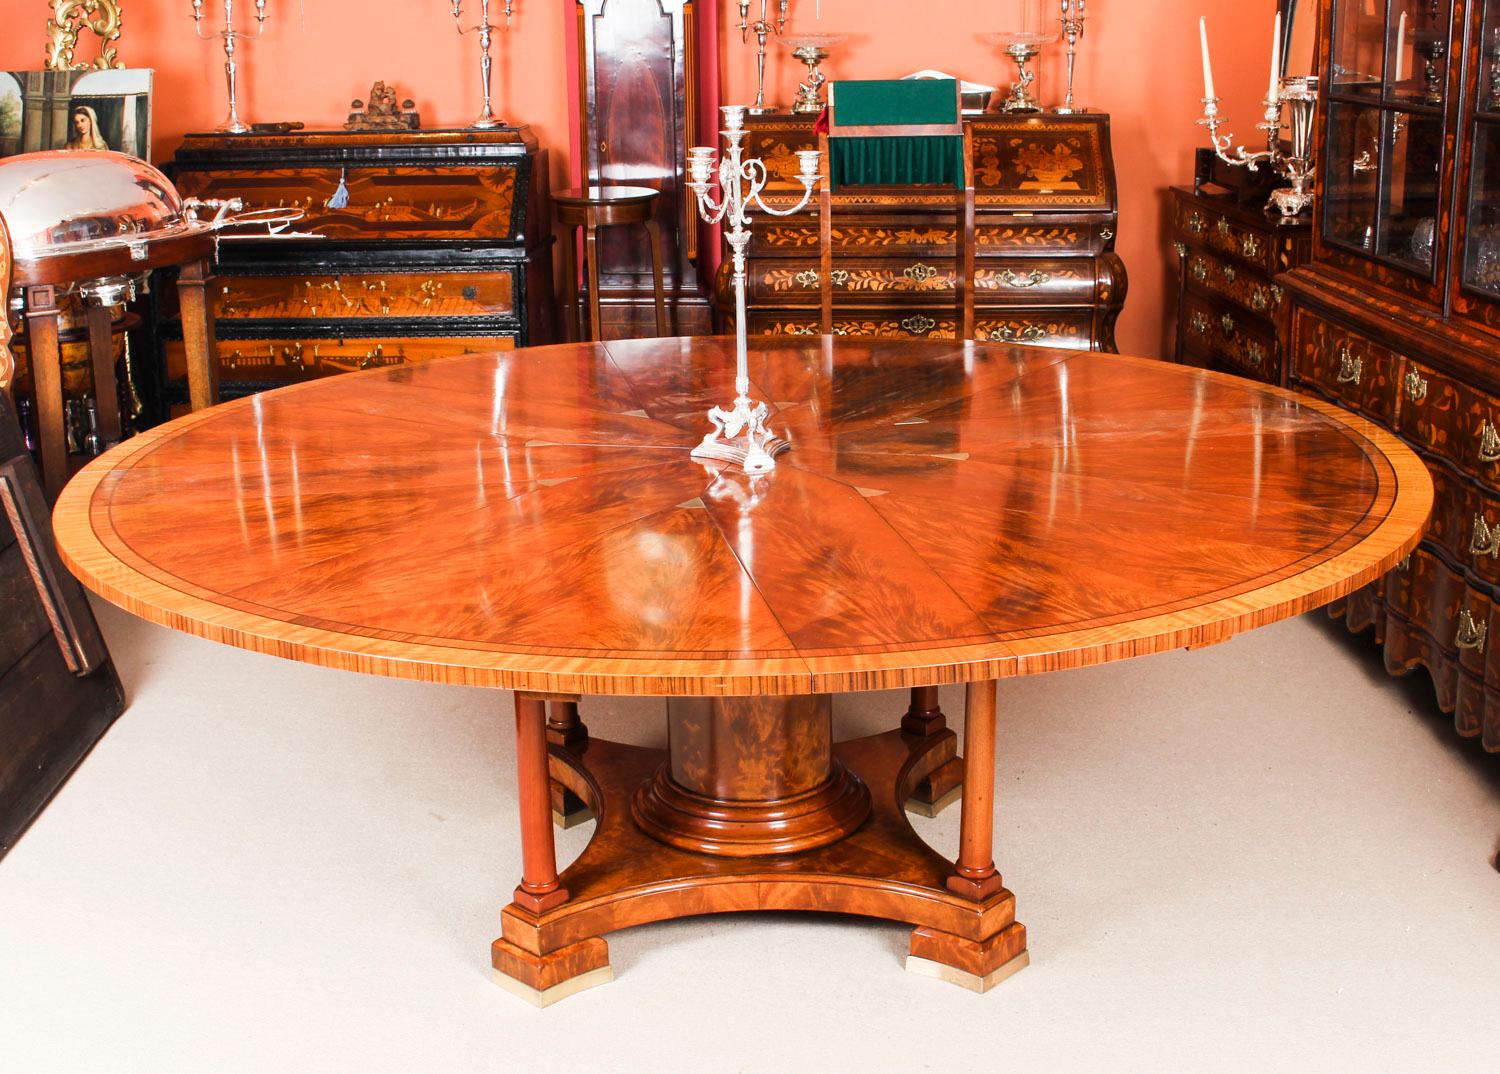 This is a beautiful flame mahogany circular expanding dining table in the manner of Johnson, Jupe & Co dating from the early 20th century.

The hexadecagon circular top features a brass capstan action rotating eight triangular segments to